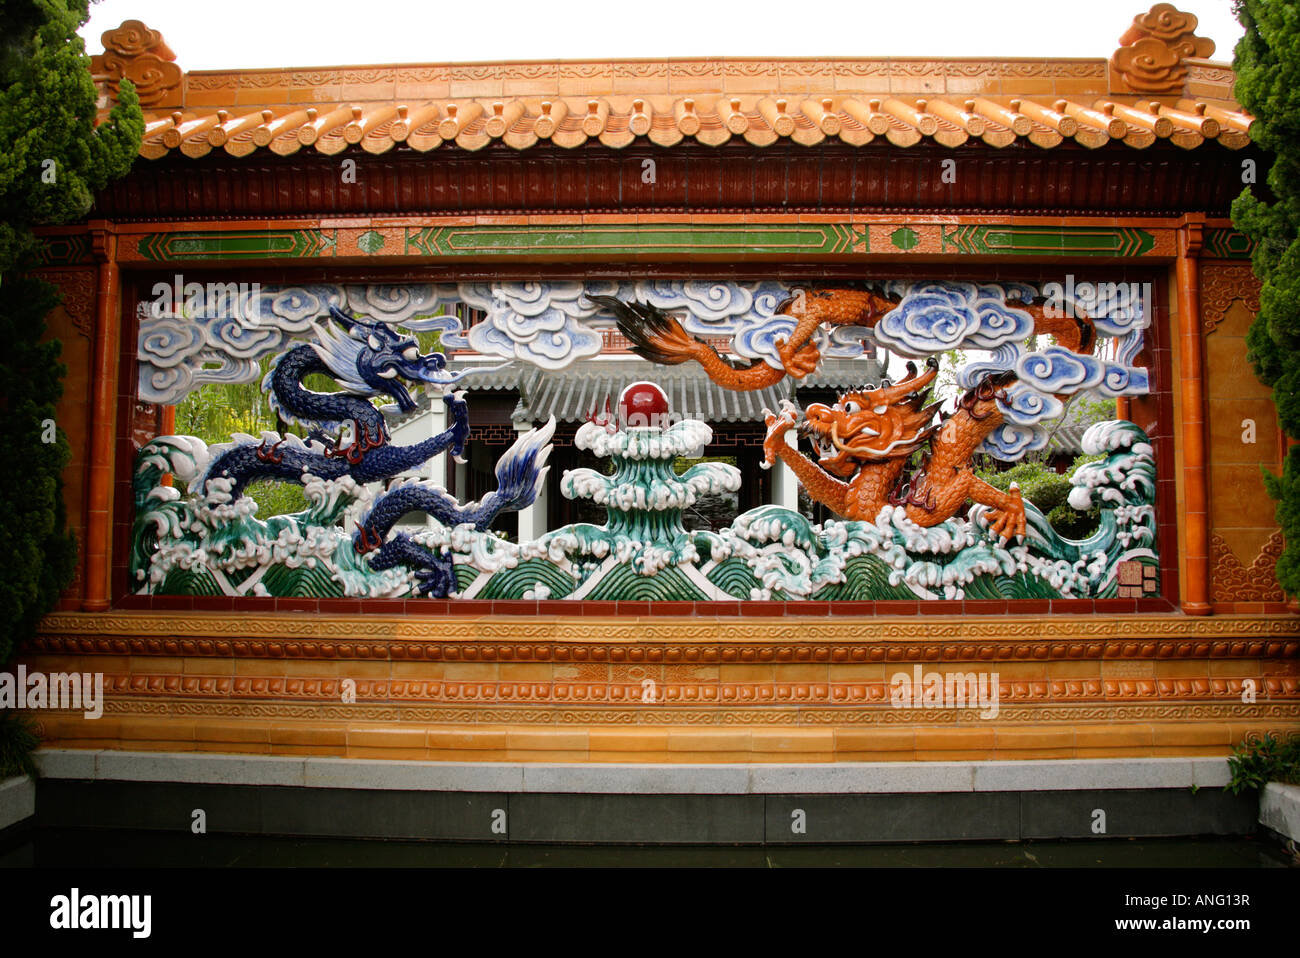 Ceramic Dragon Wall in Chinese Garden of Friendship, Darling Harbour,Sydney. Stock Photo